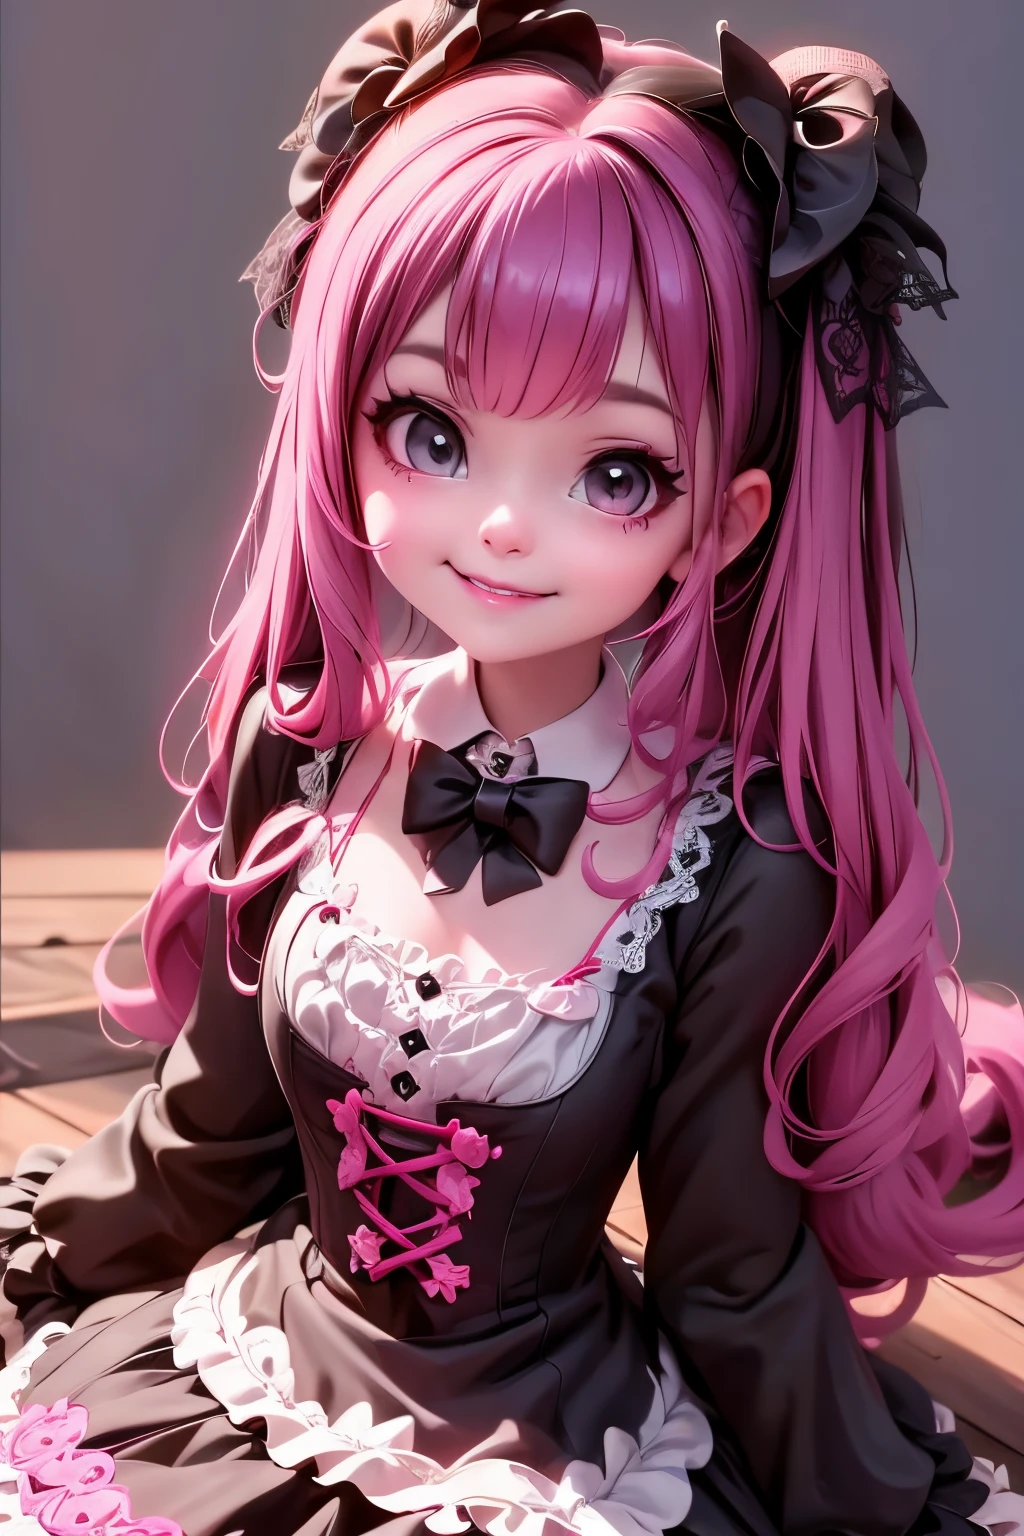 a close up of a (demon girl) smiling in a black lace outfit, frilly outfit, witchcore clothes, fantasy outfit, lolita style, cutecore clowncore, fairycore, style of magical girl, goth girl, cutecore, , 1 7 - year - old anime goth girl